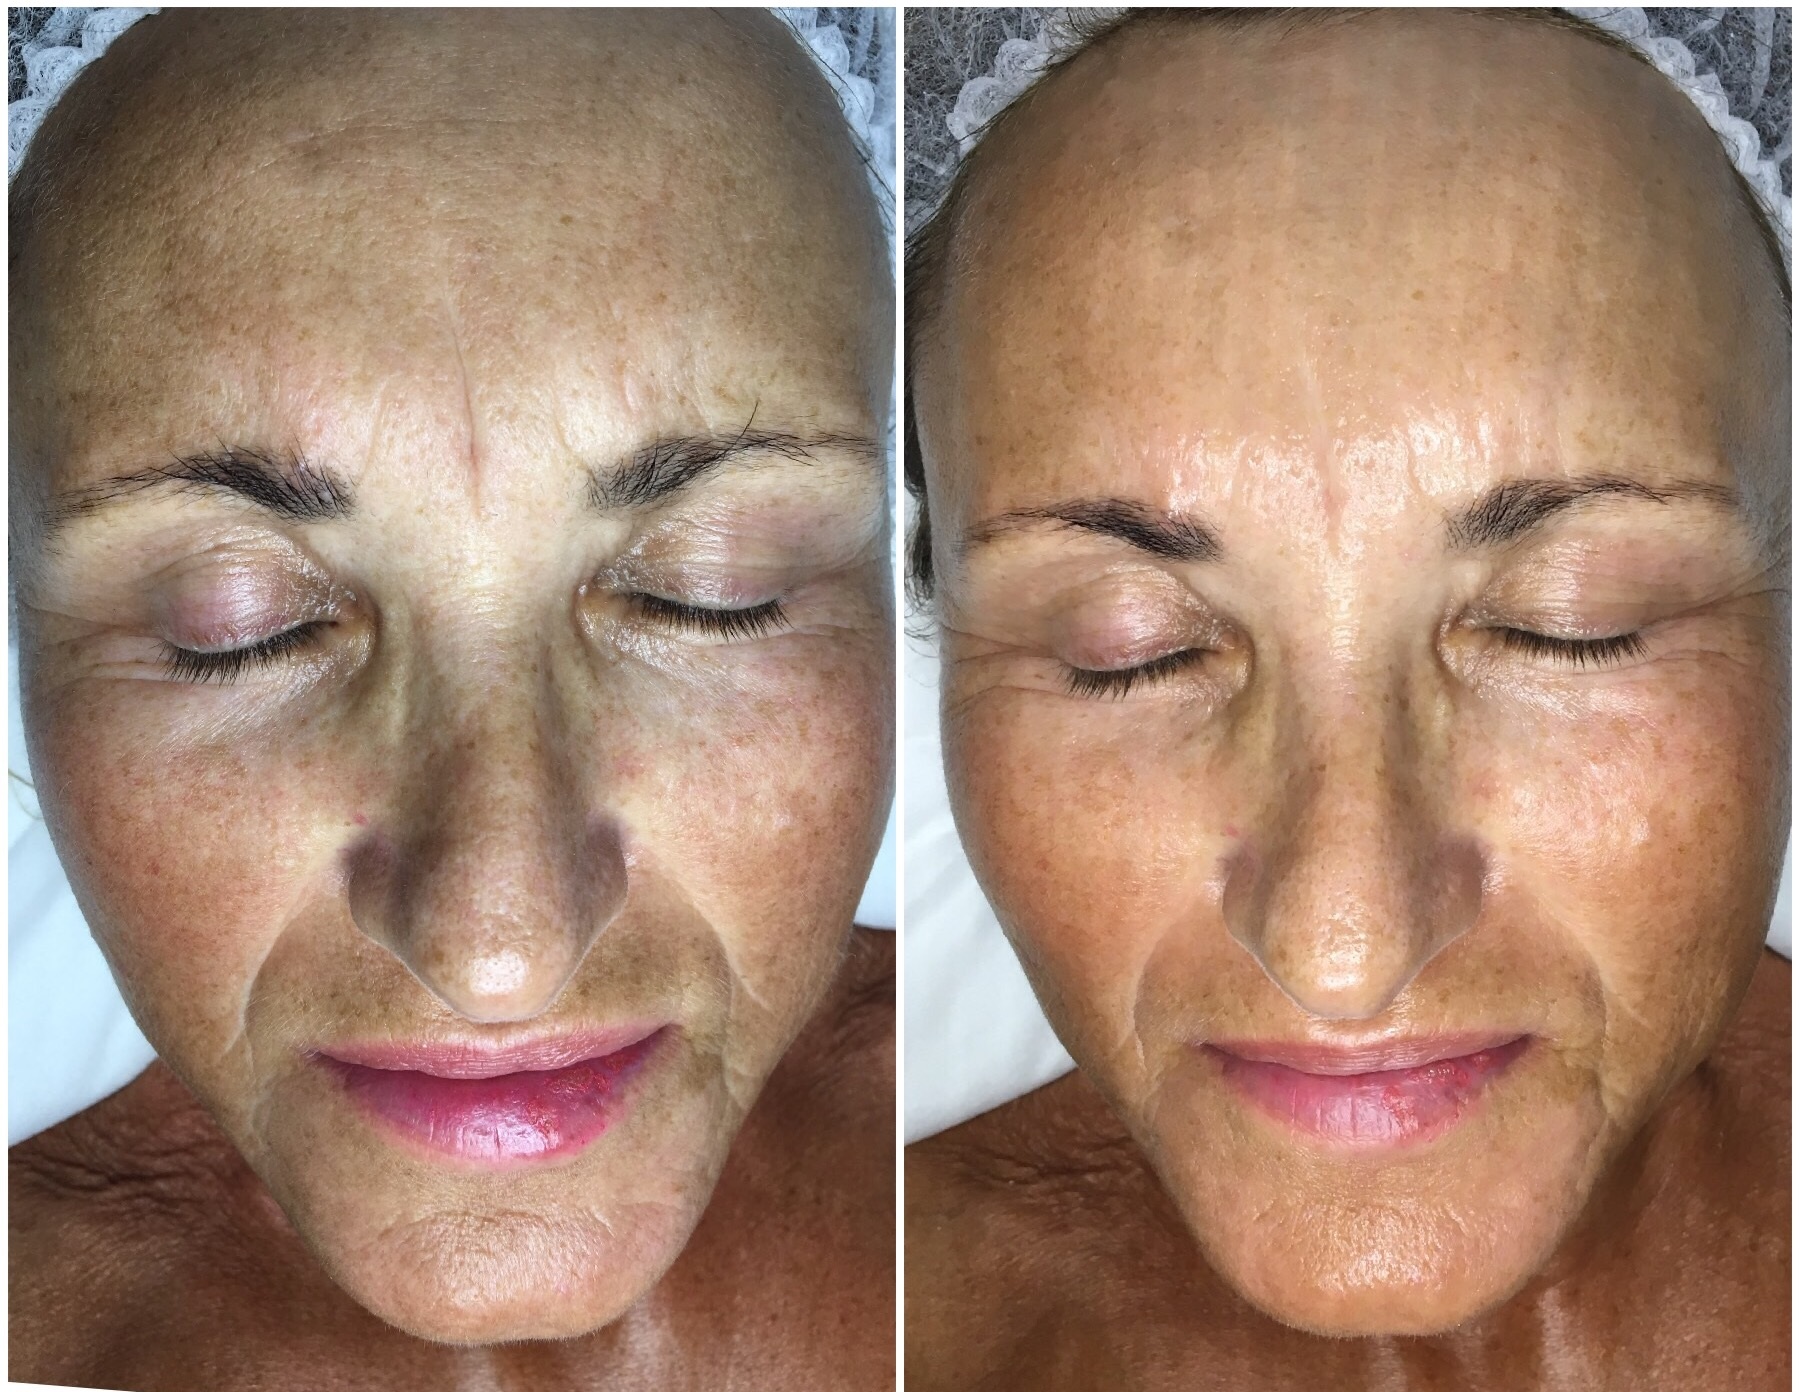 Create a facelift using only makeup: Here's how